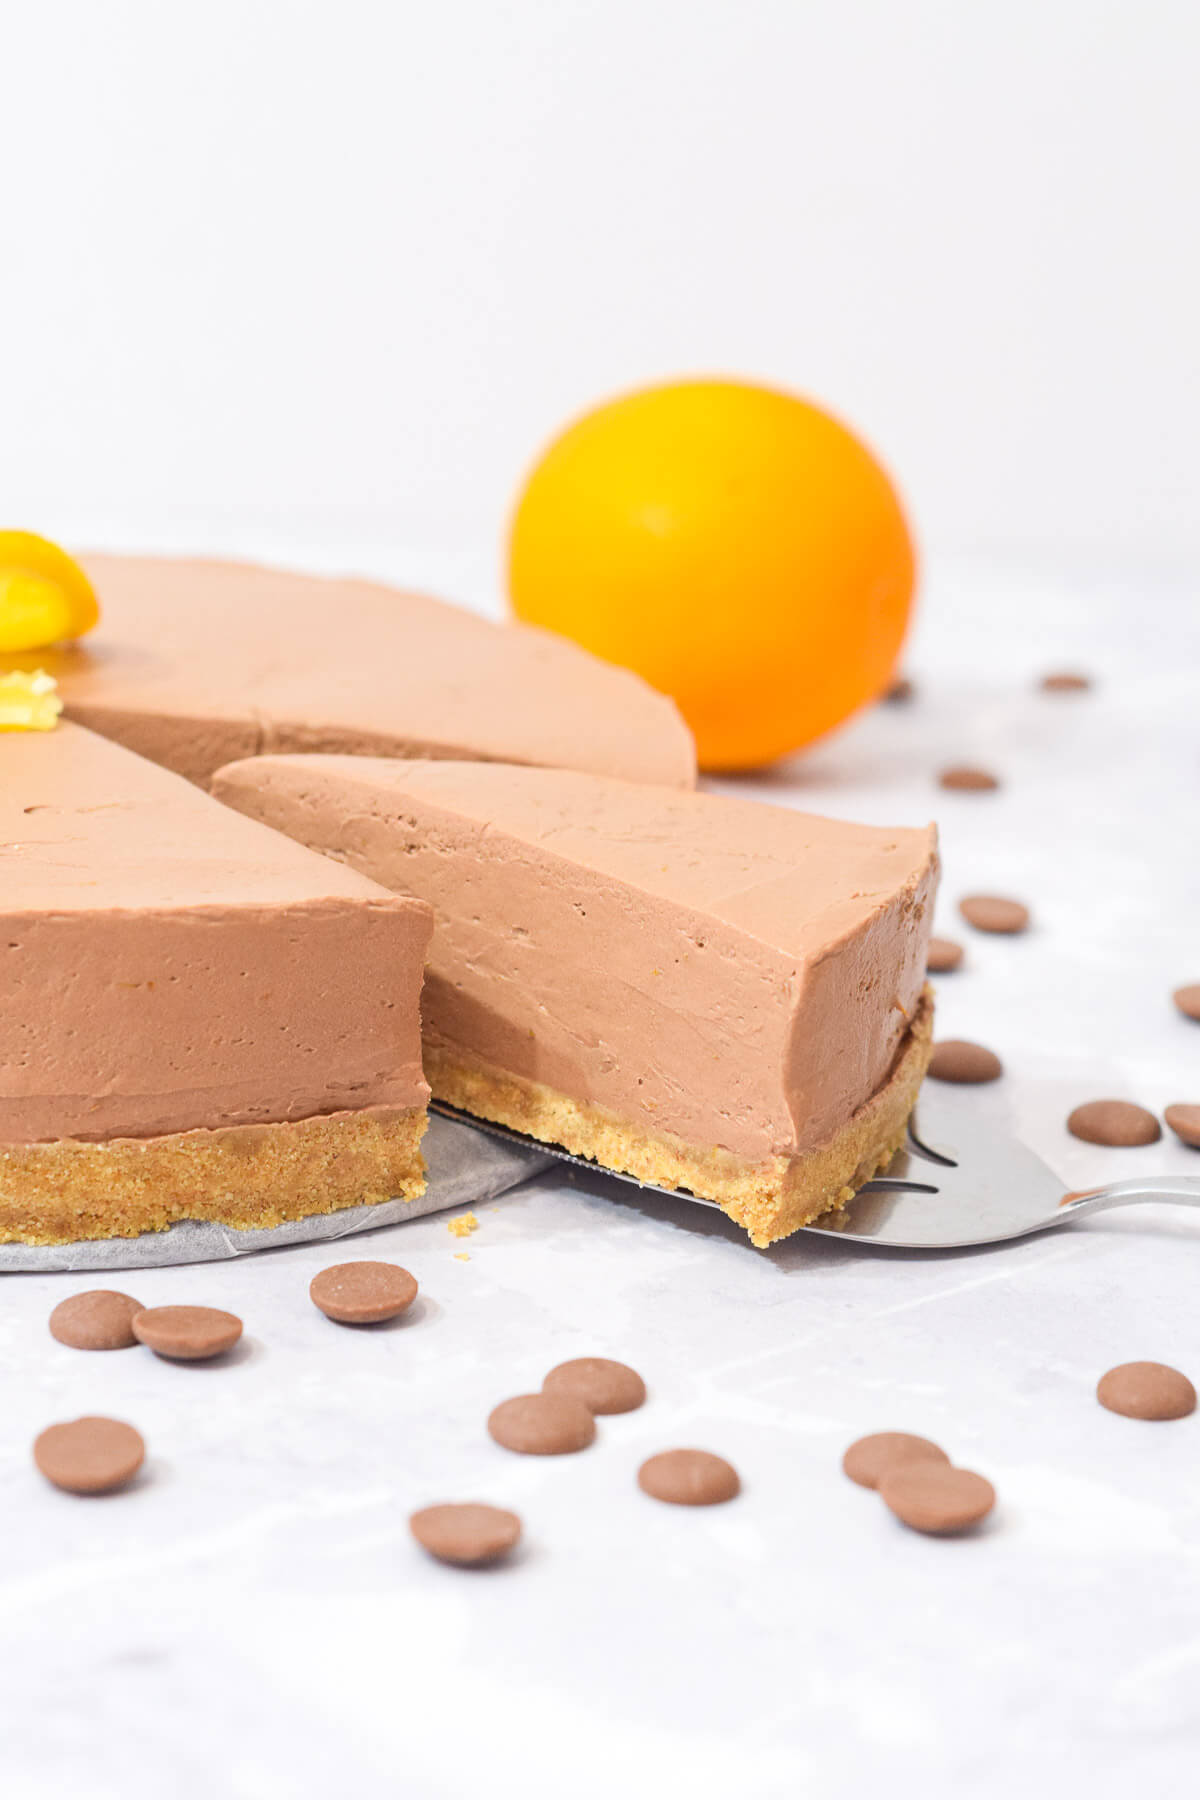 chocolate orange cheesecake with a slice being pulled out and a whole orange behind.